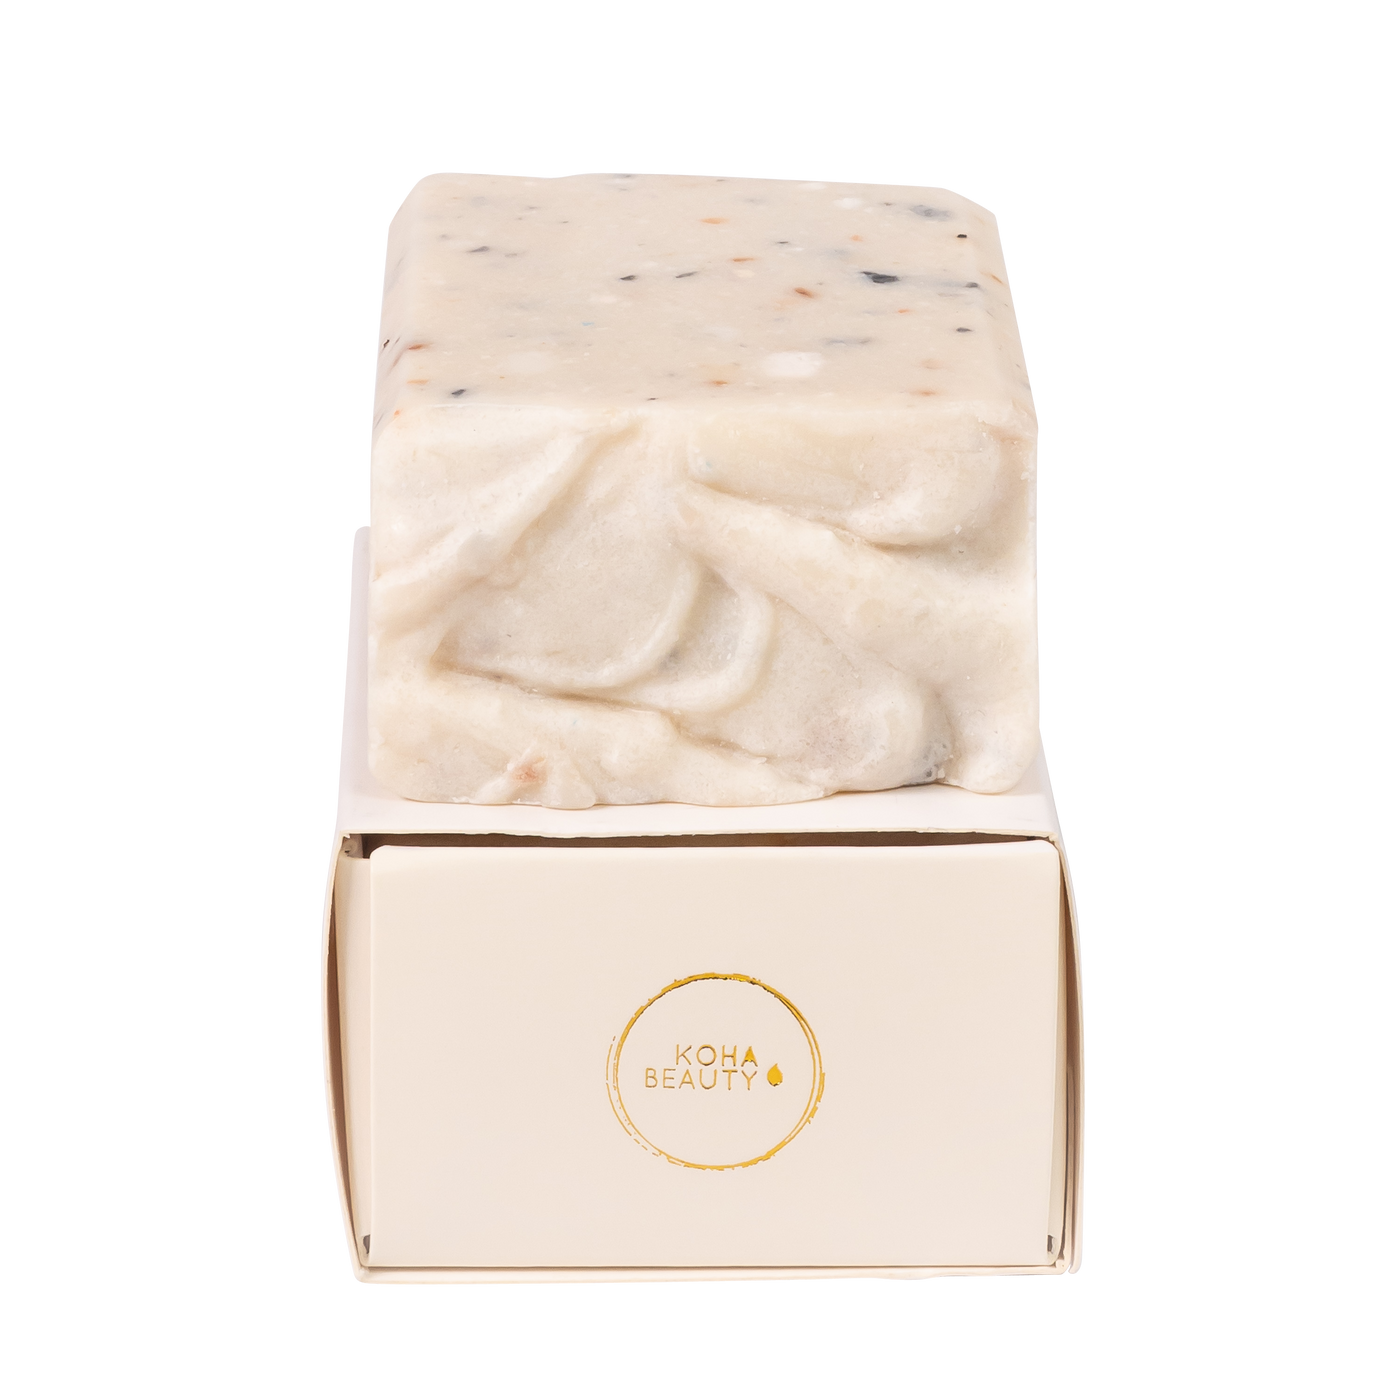 Buy Online Premium Quality Natural and Organic Stardust - Shea Butter, Kaolin Clay & Lavender | Buy Cruelty Free Cosmetics & Vegan Beauty Products Online - KOHA Beauty